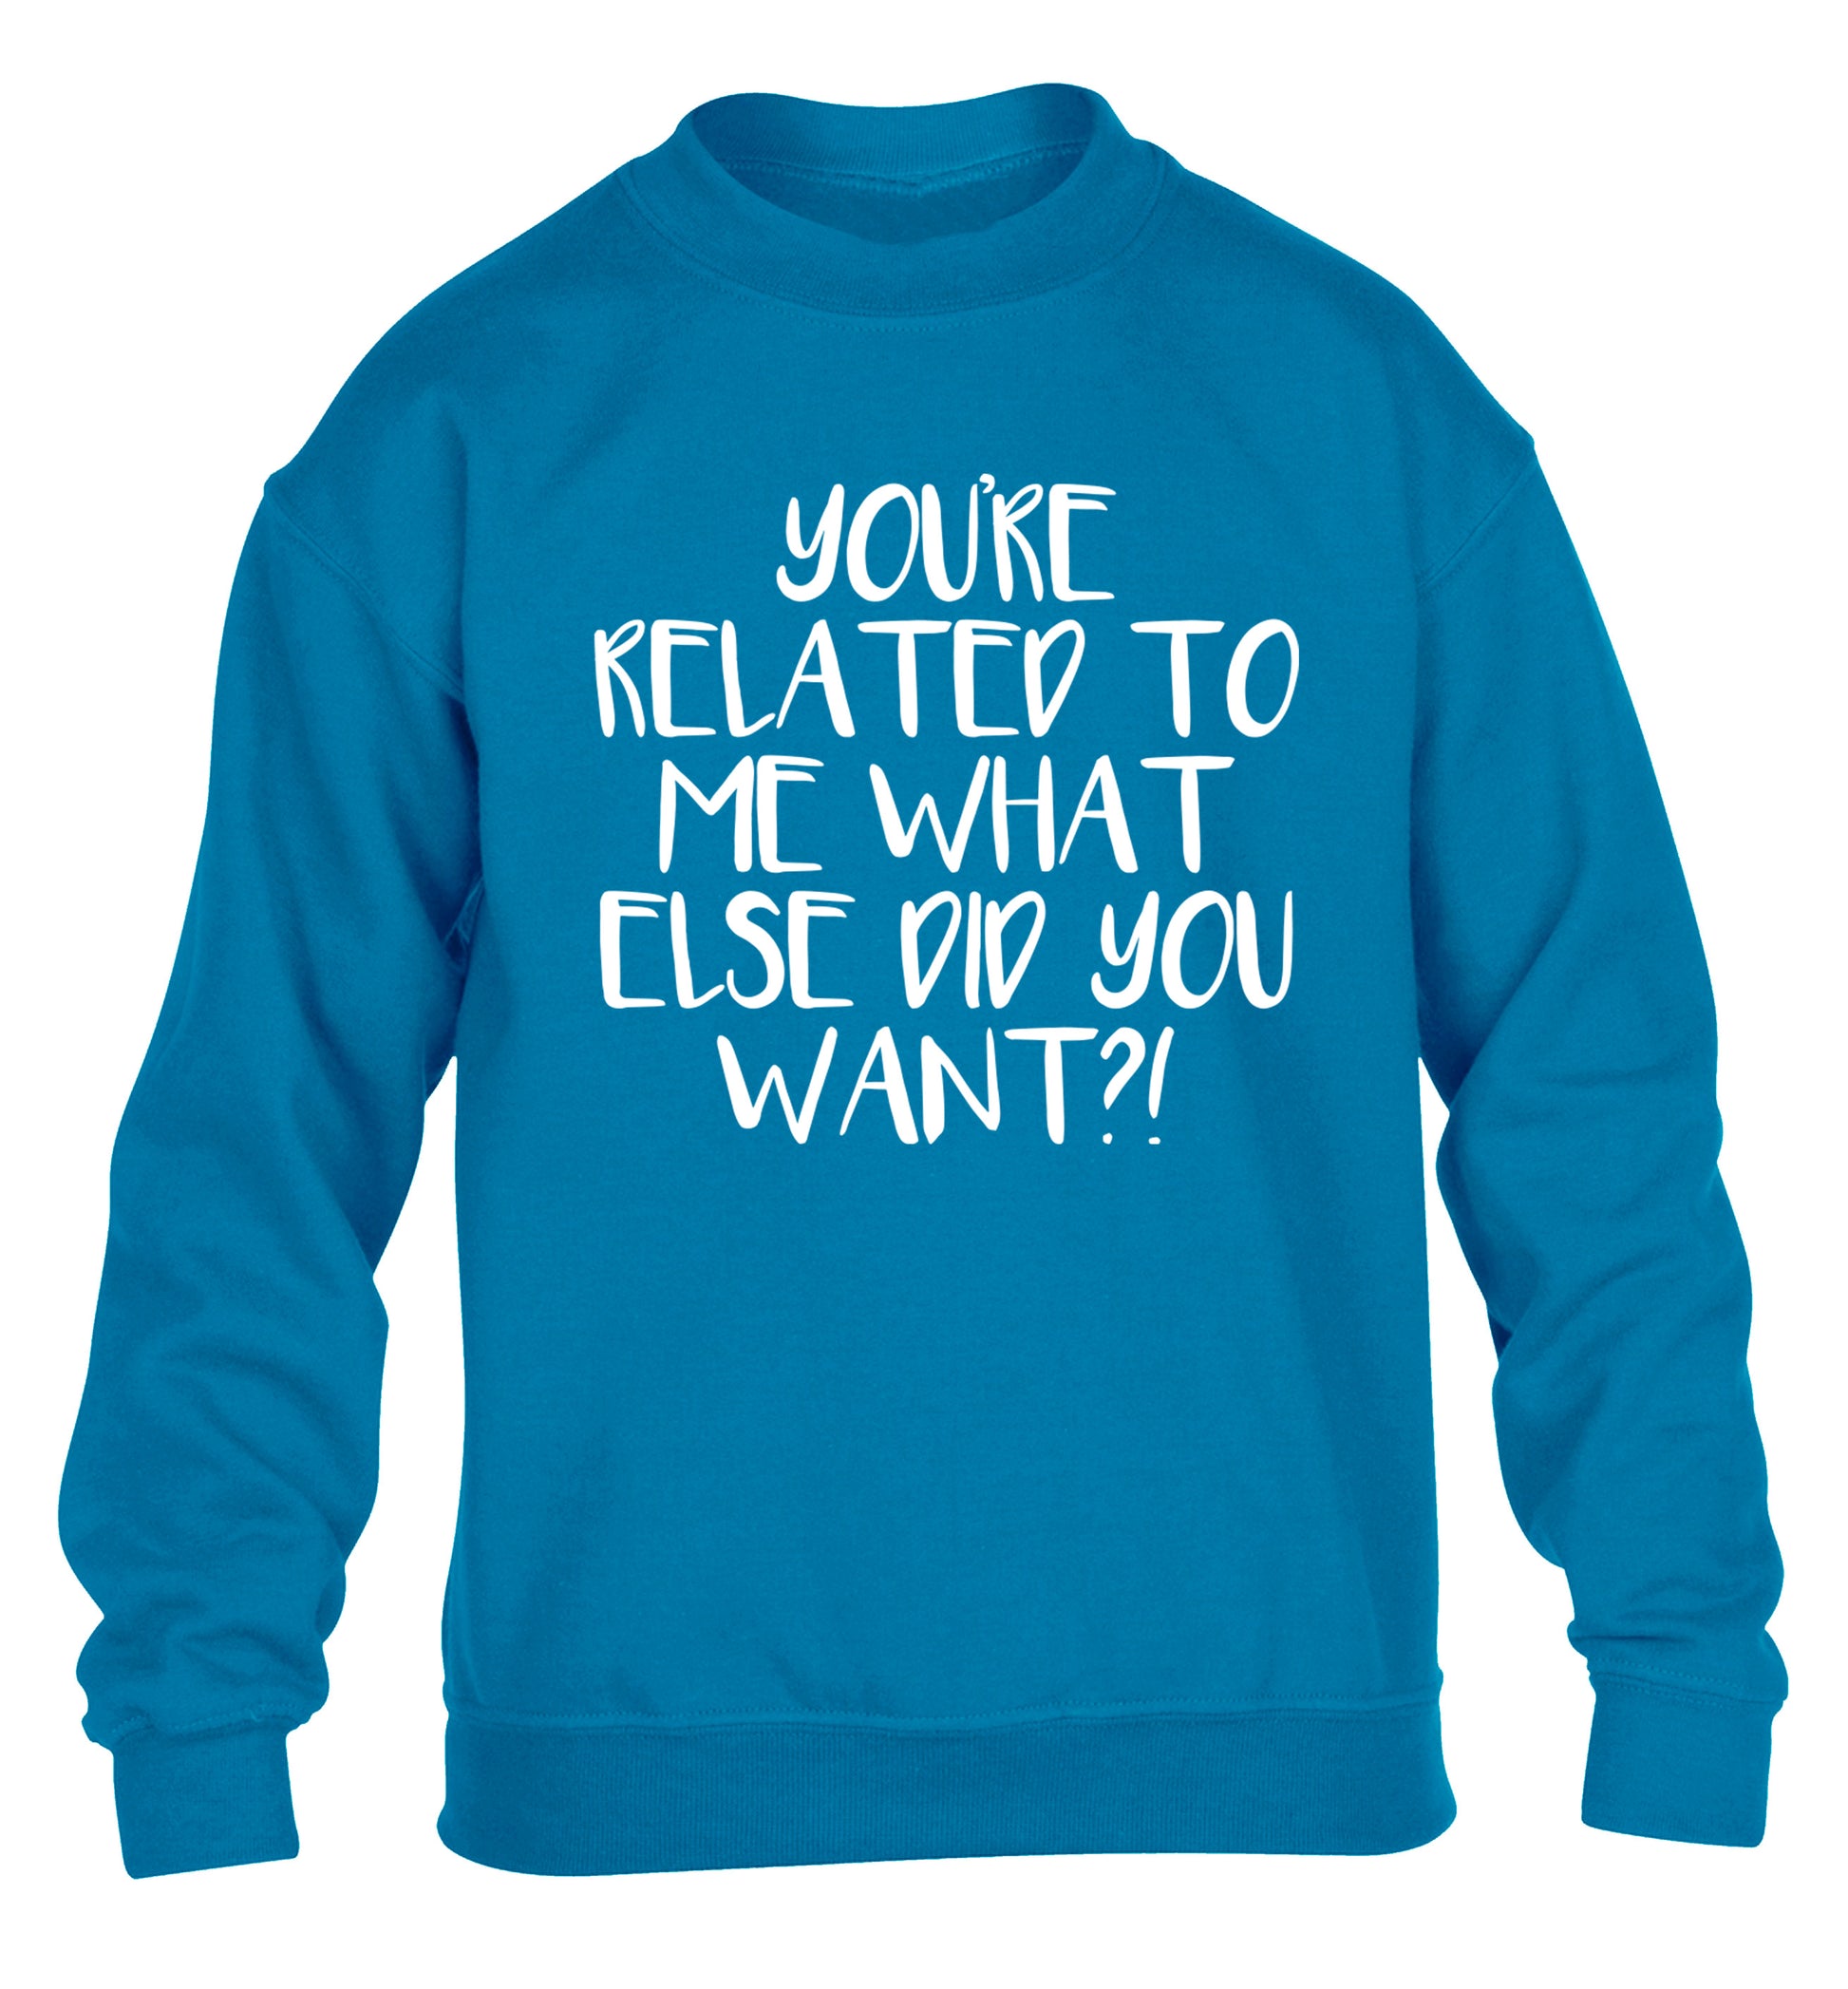 You're related to me what more do you want? children's blue sweater 12-13 Years